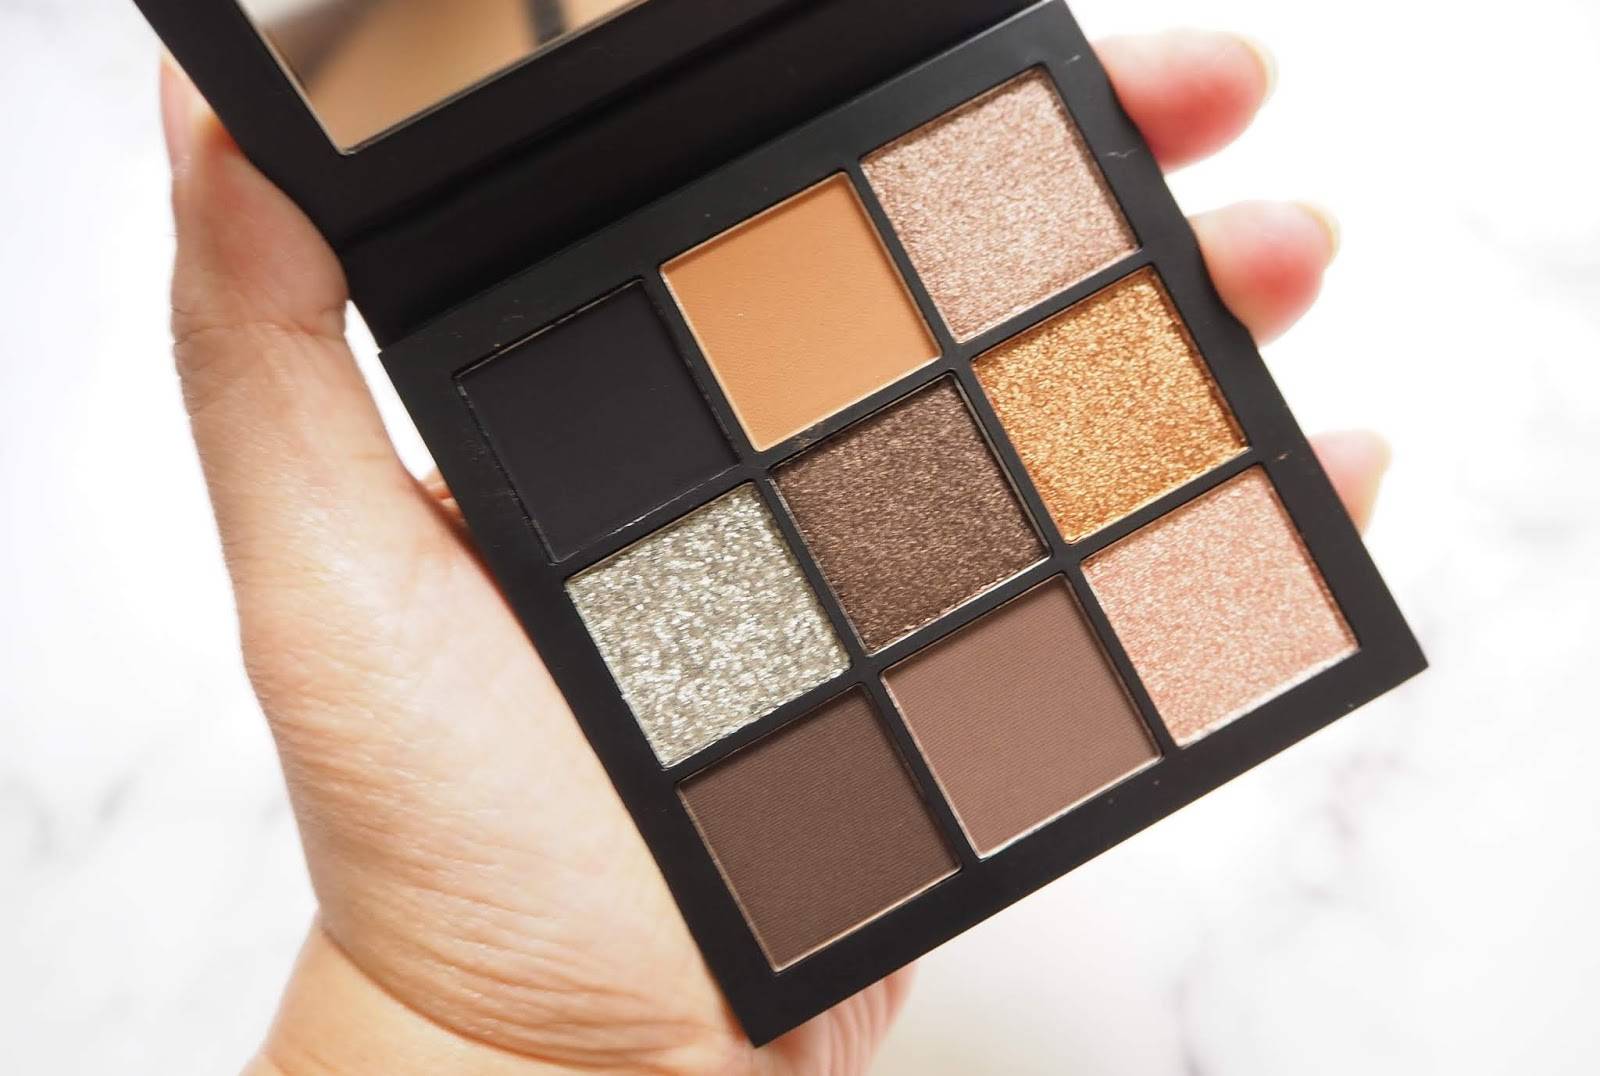 Huda beauty smokey obsessions eyeshadow palette review, photos, swatches